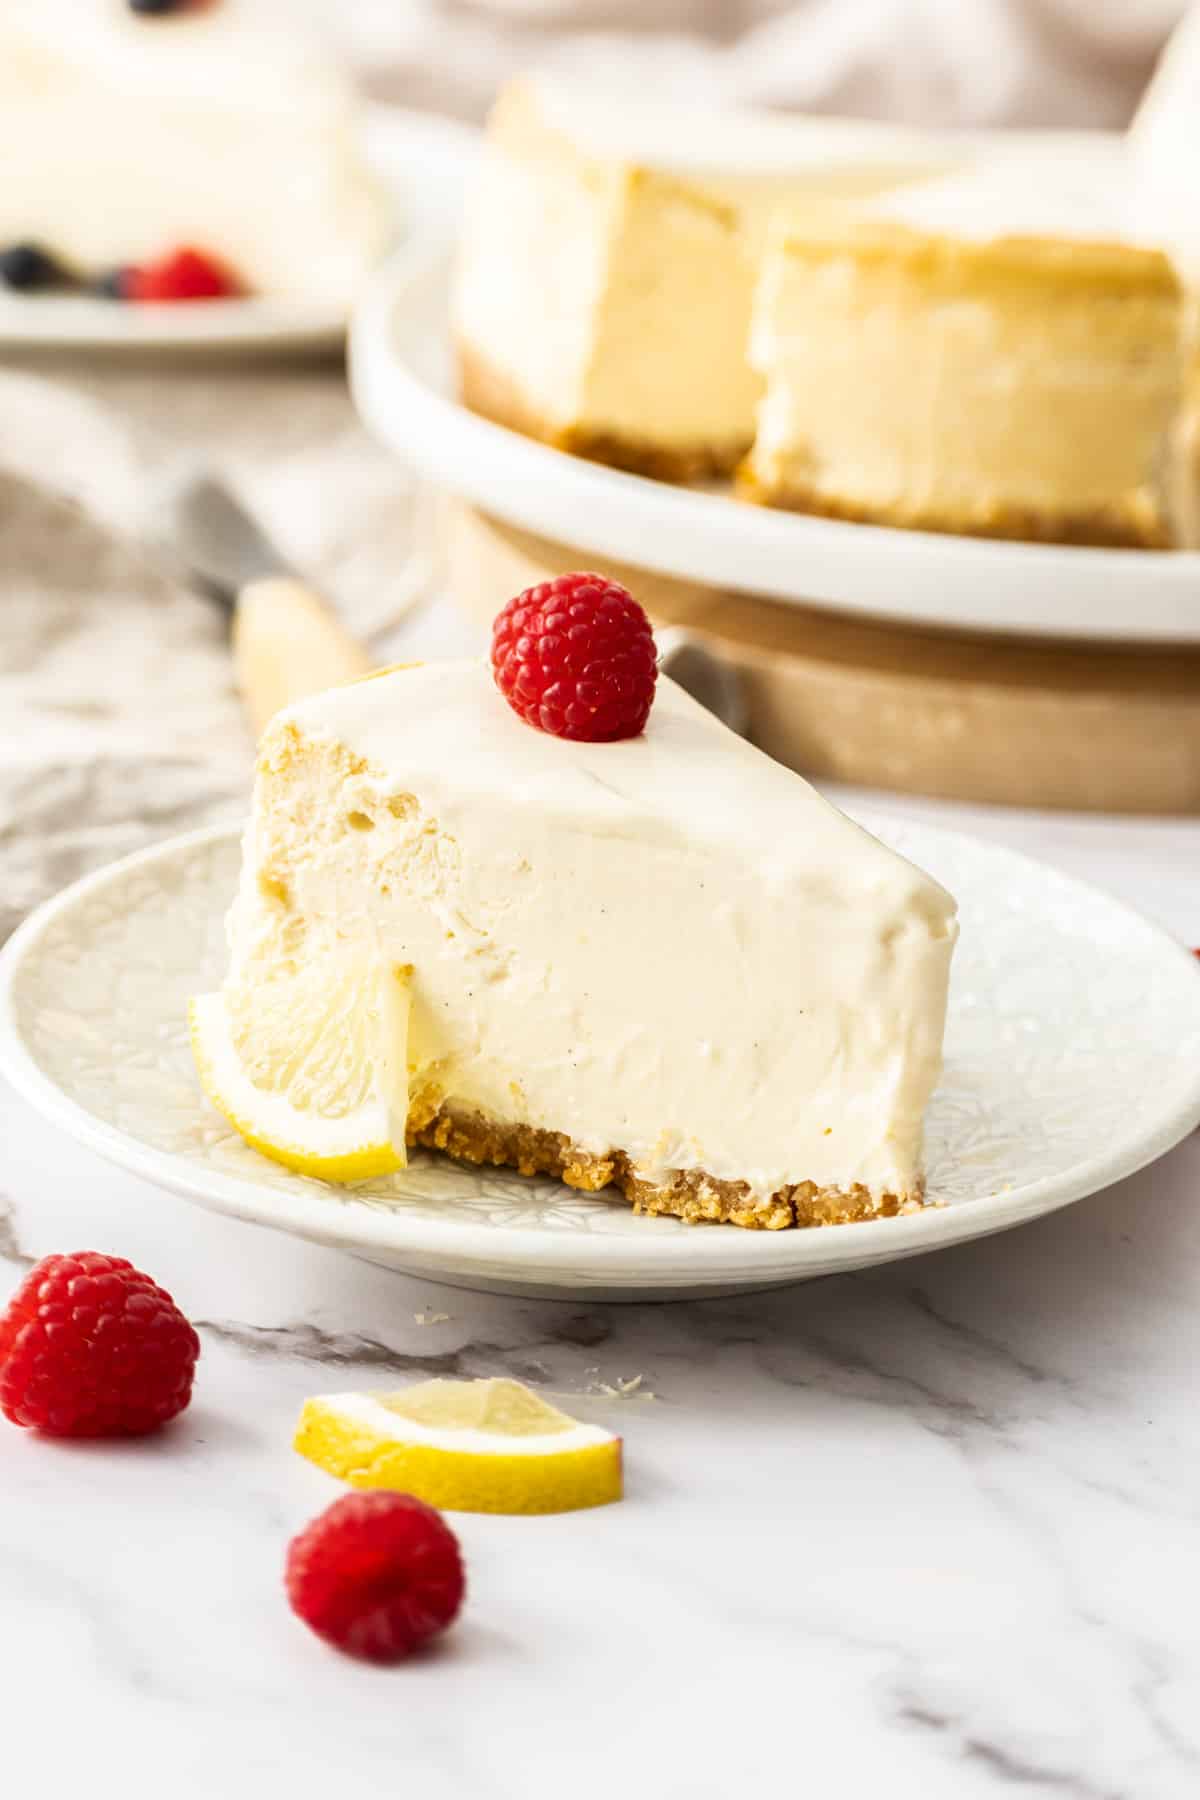 https://www.thecookingcollective.com.au/wp-content/uploads/2023/05/New-York-Cheesecake-4.jpg